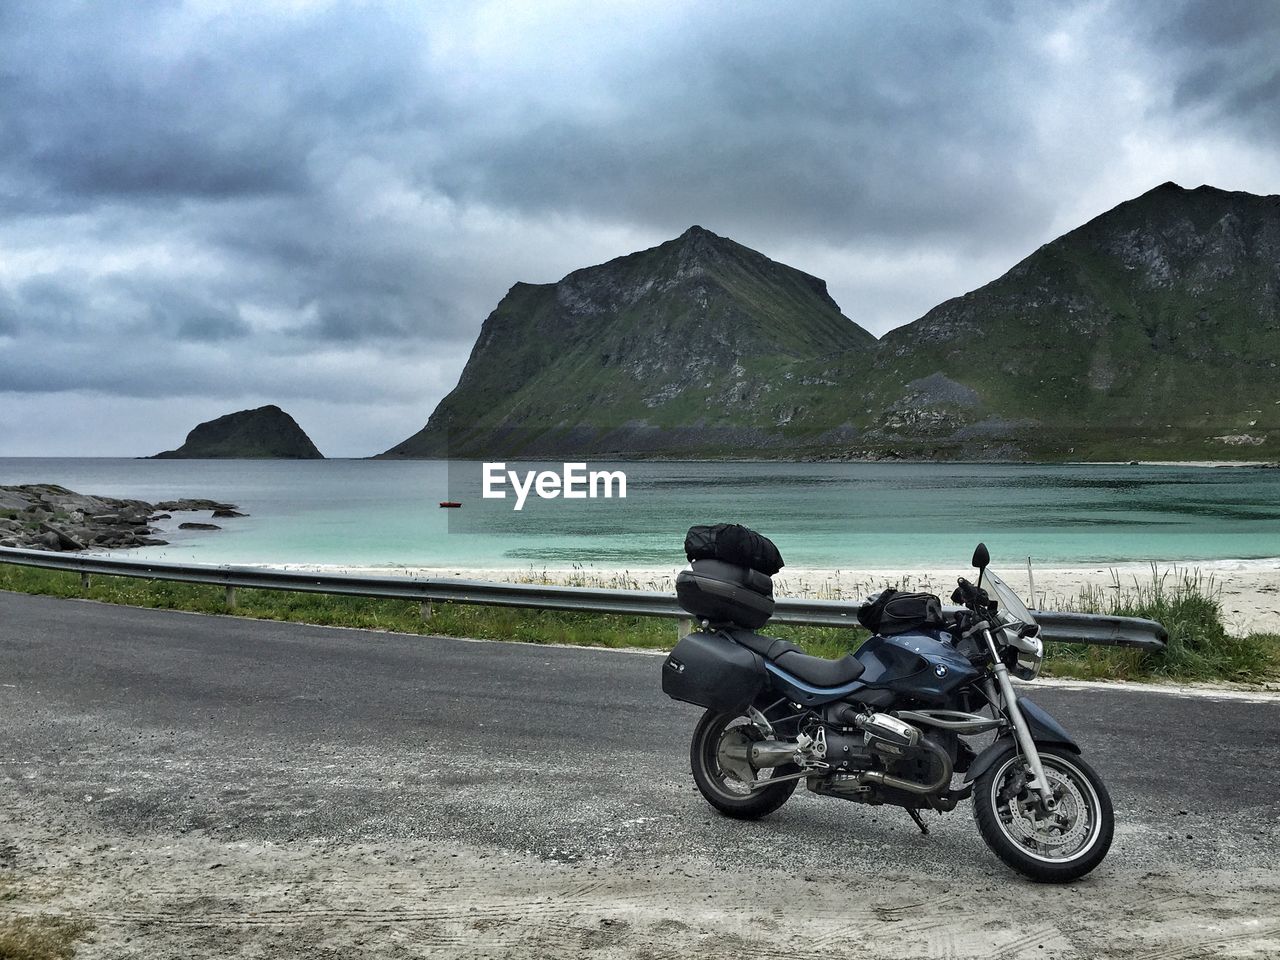 Motorcycle on road by sea against cloudy sky